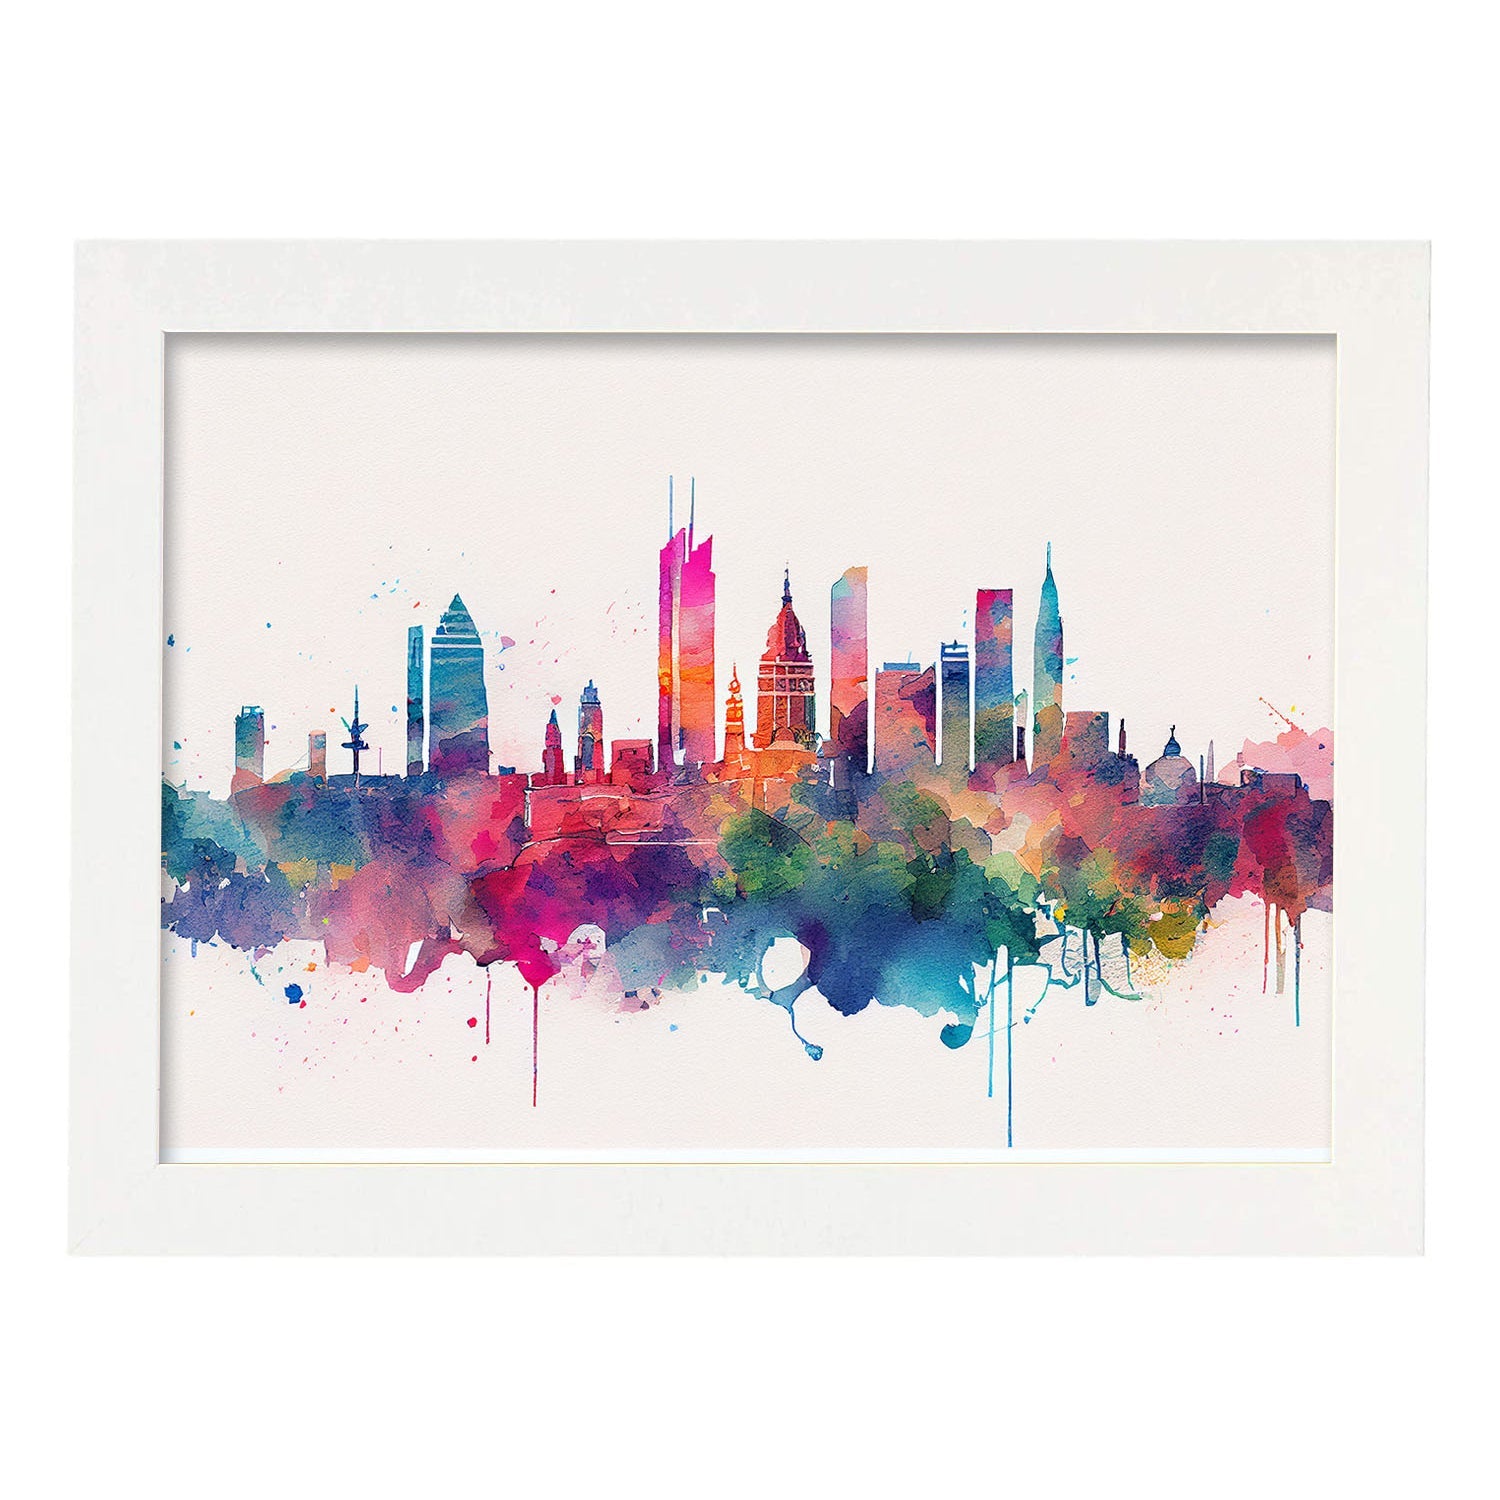 Nacnic watercolor of a skyline of the city of Mexico City. Aesthetic Wall Art Prints for Bedroom or Living Room Design.-Artwork-Nacnic-A4-Marco Blanco-Nacnic Estudio SL